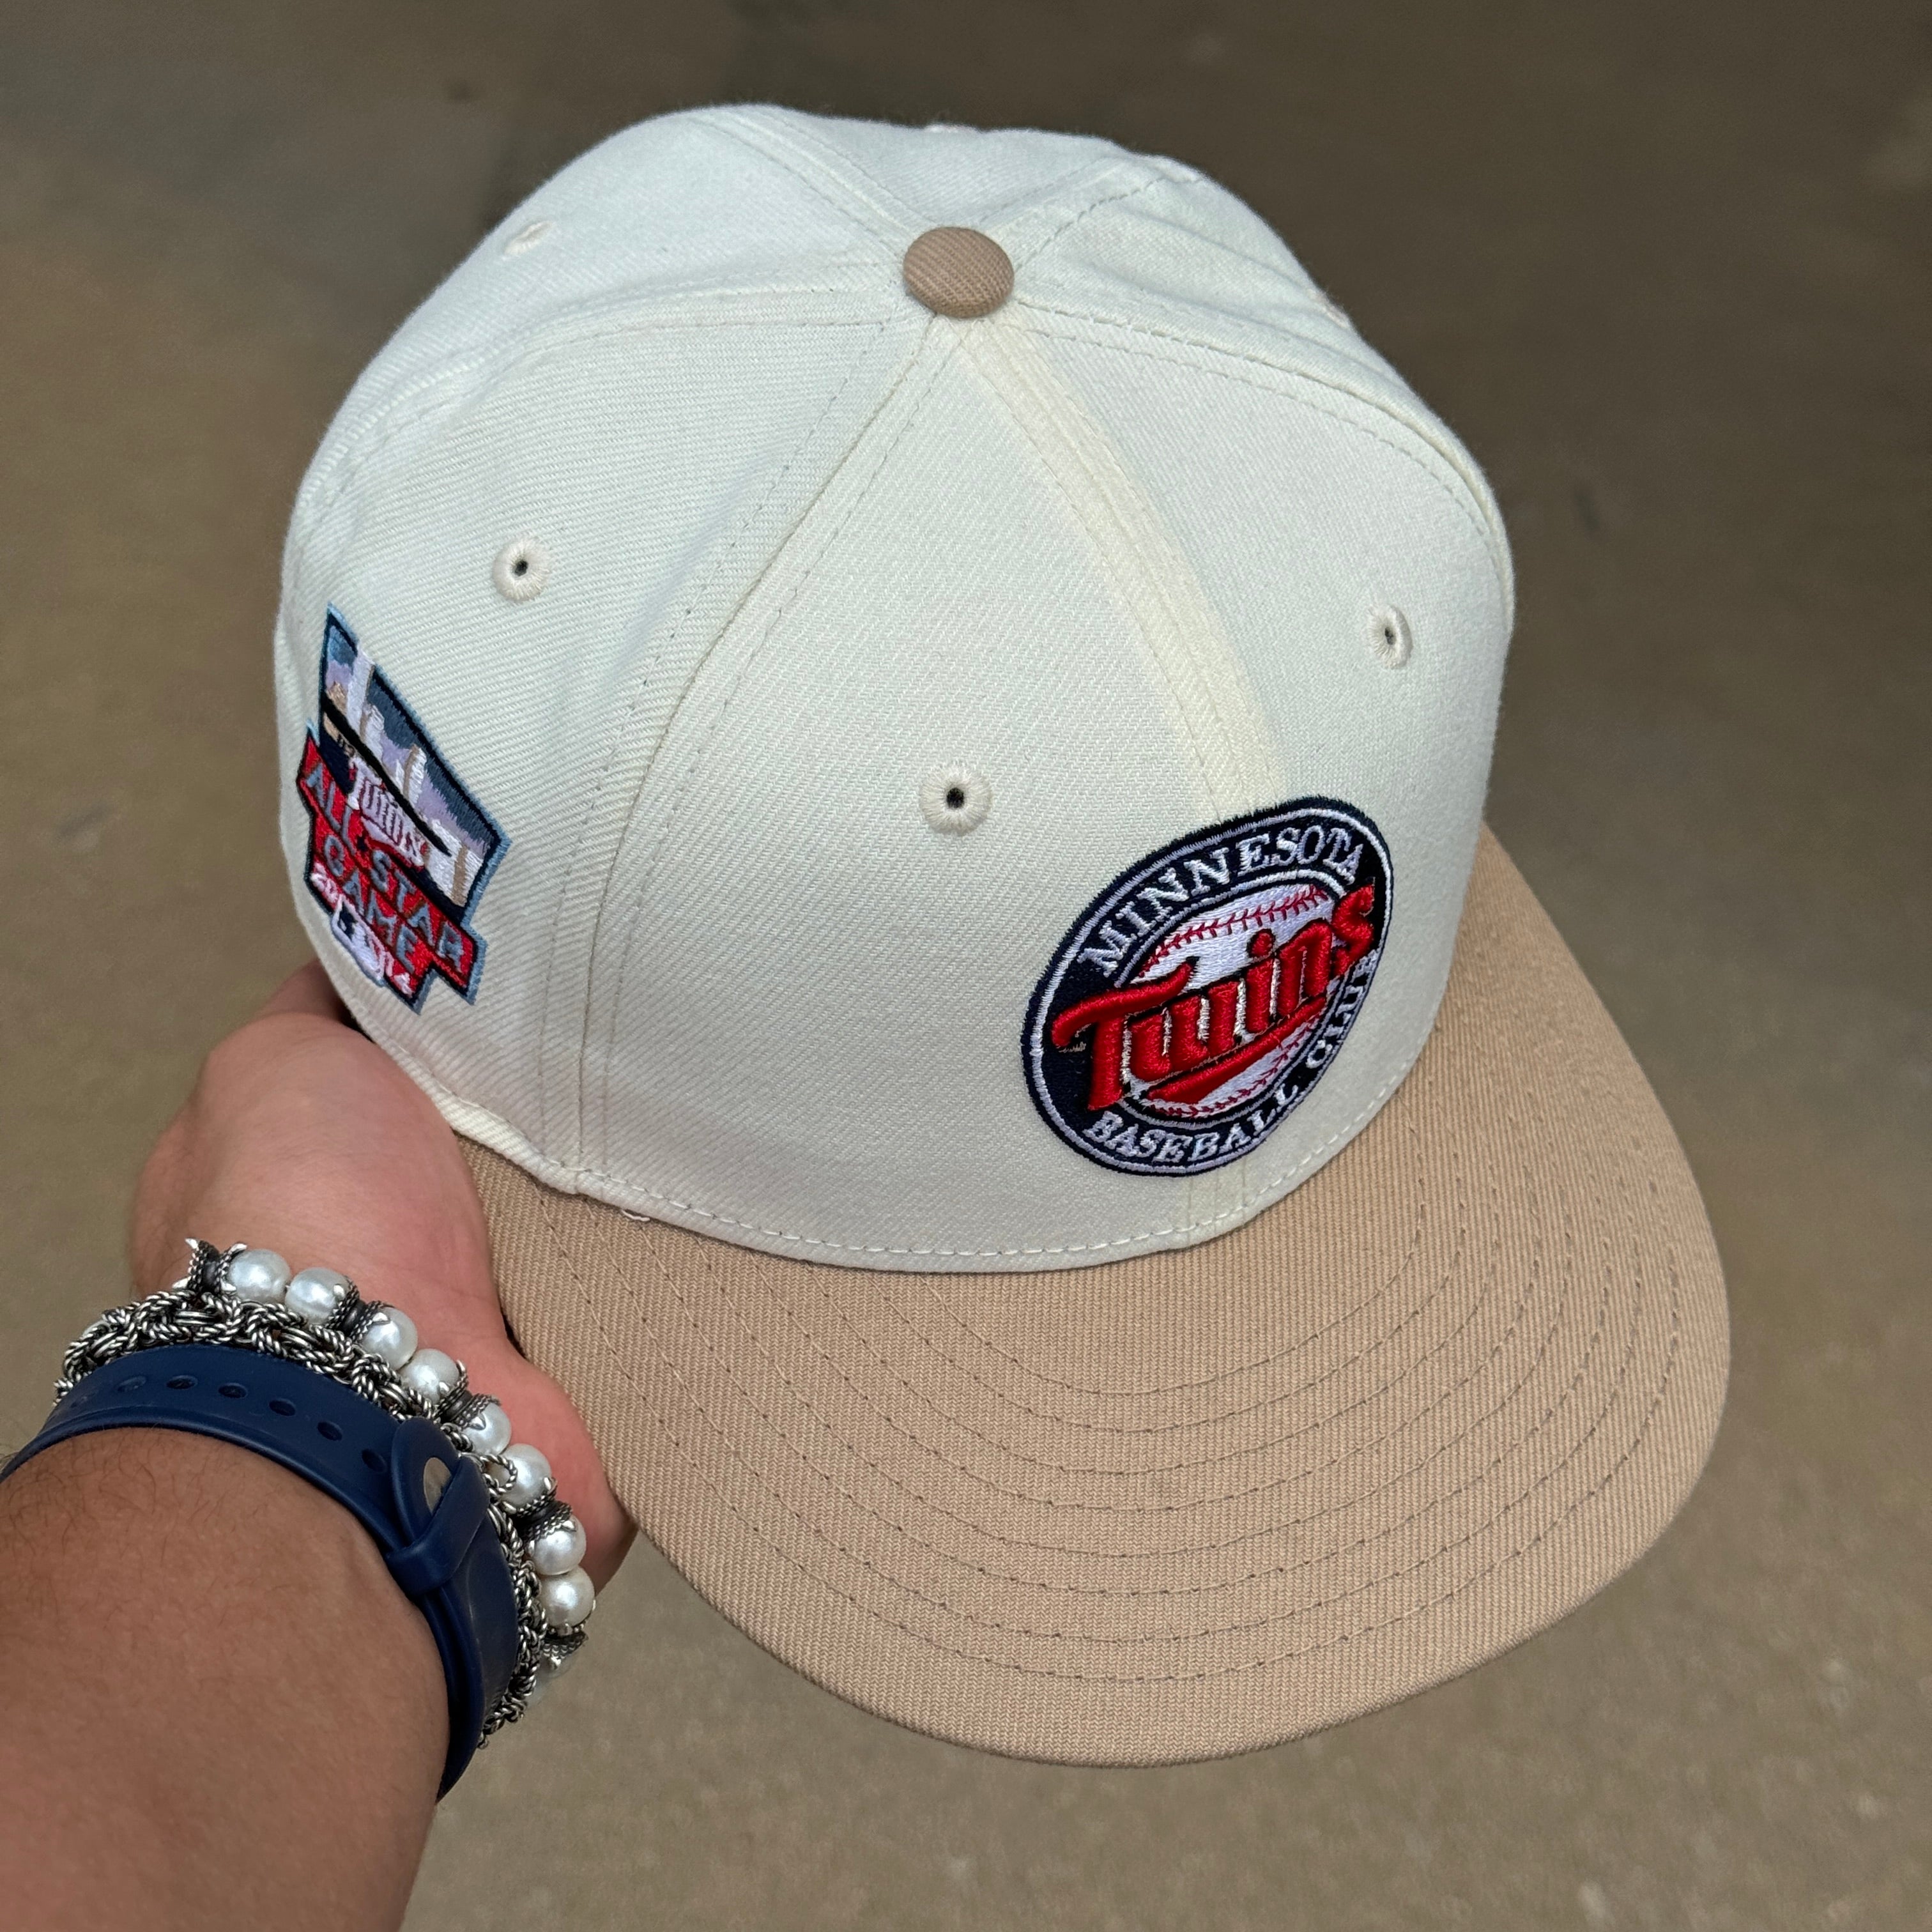 USED 1/8 Chrome Minnesota Twins All Star Game 2014 59fifty New Era Fitted Hat Cap